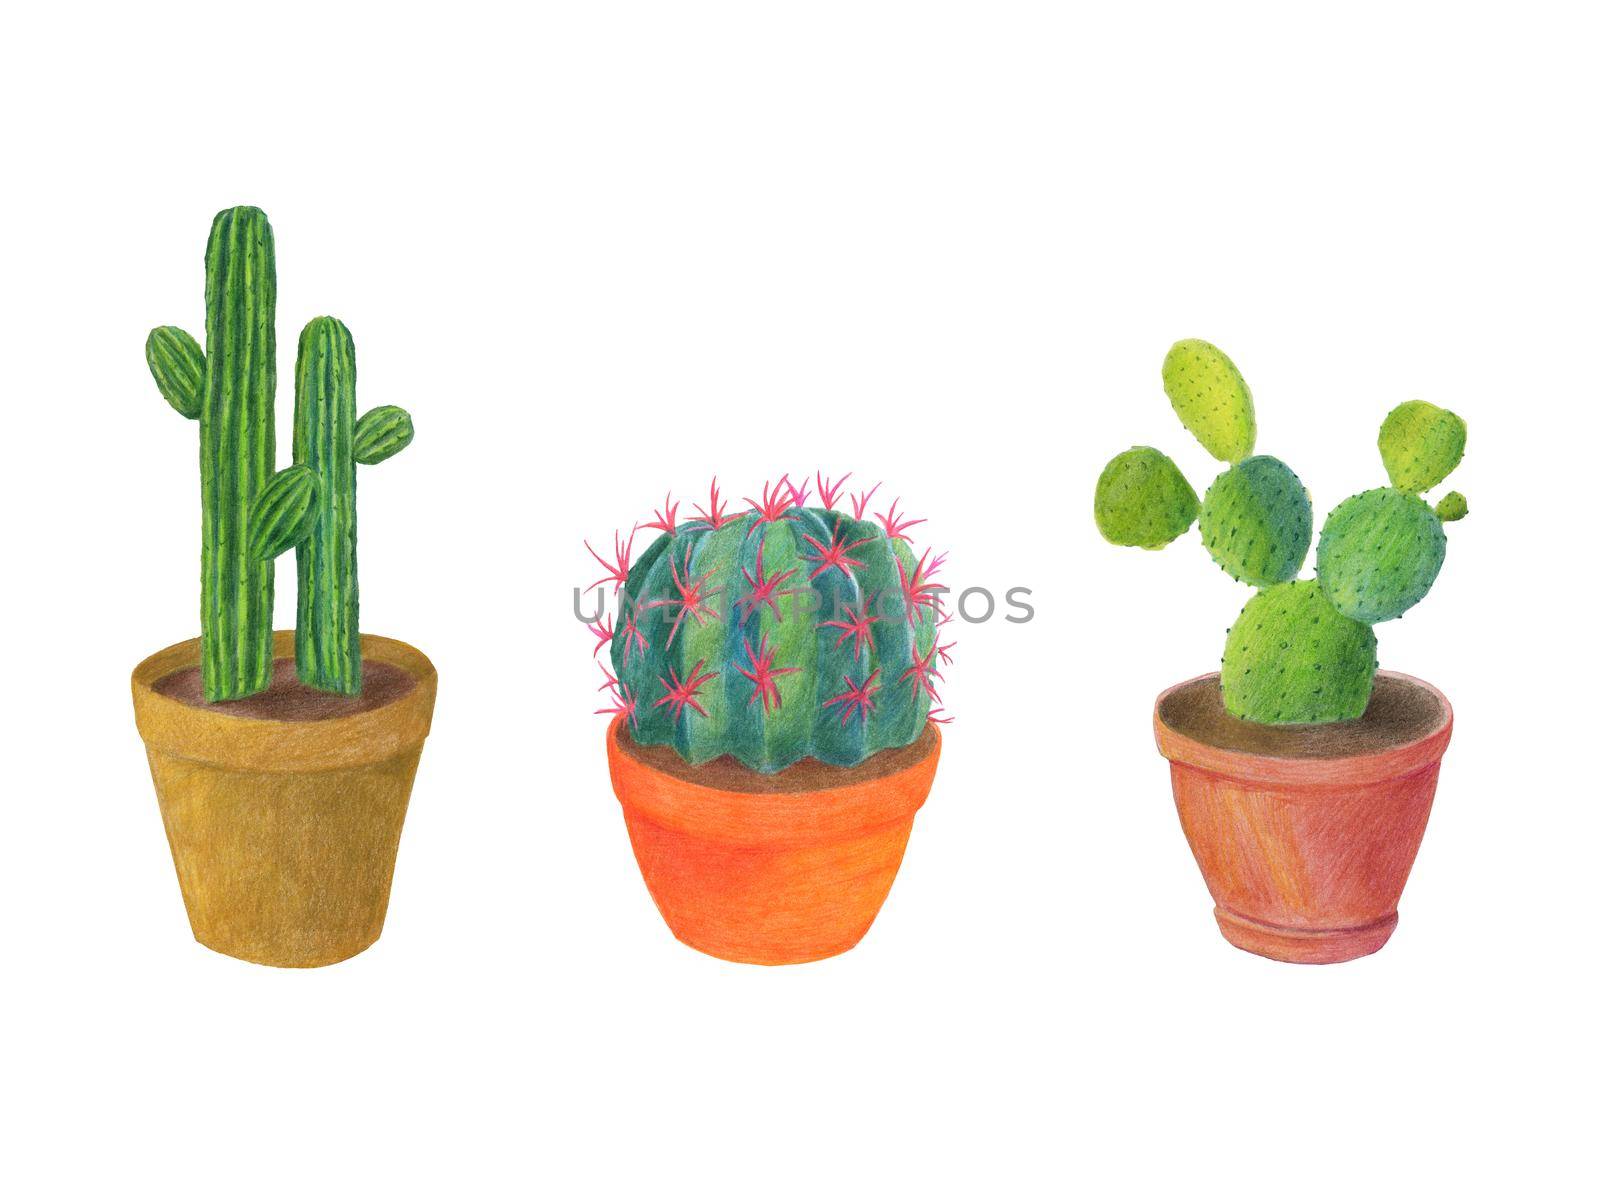 Cactus hand drawn illustrations. Home plant in pot. Cute potted cacti isolated on white background